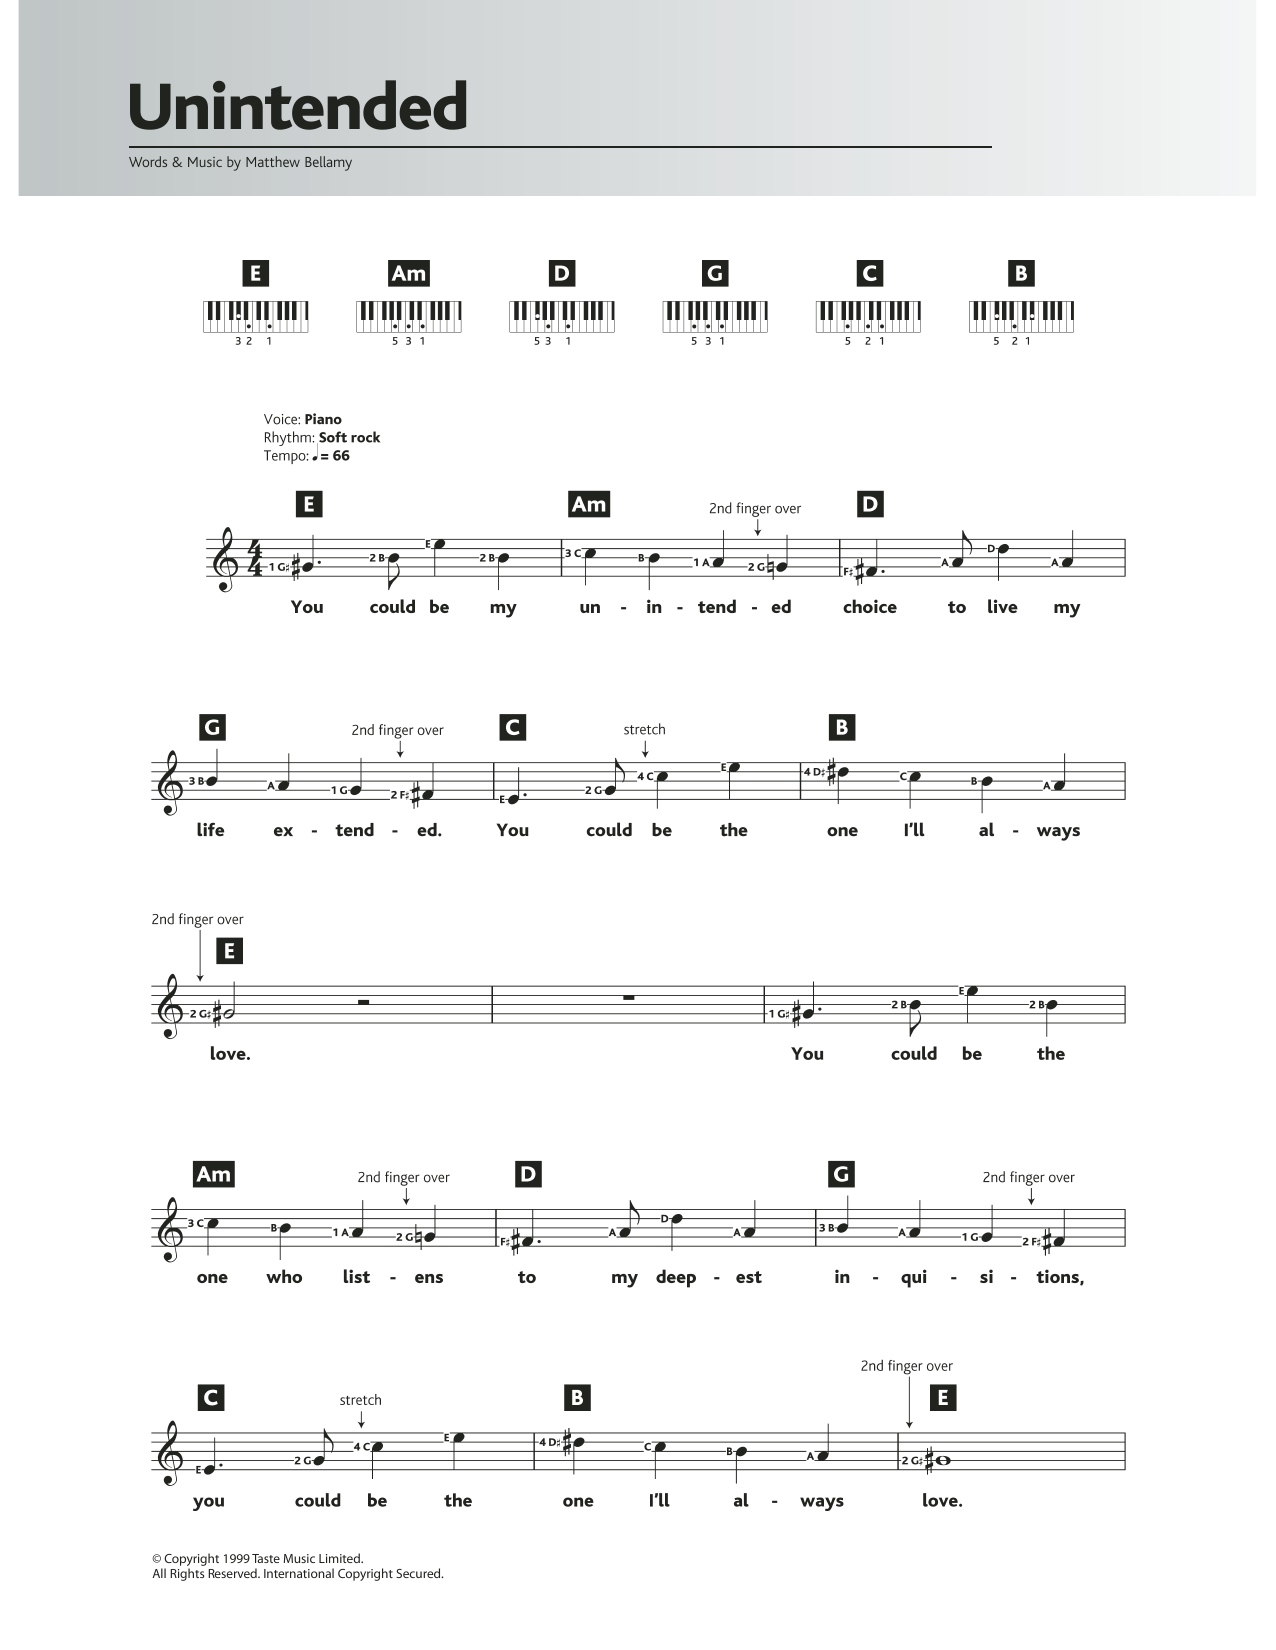 Download Muse Unintended Sheet Music